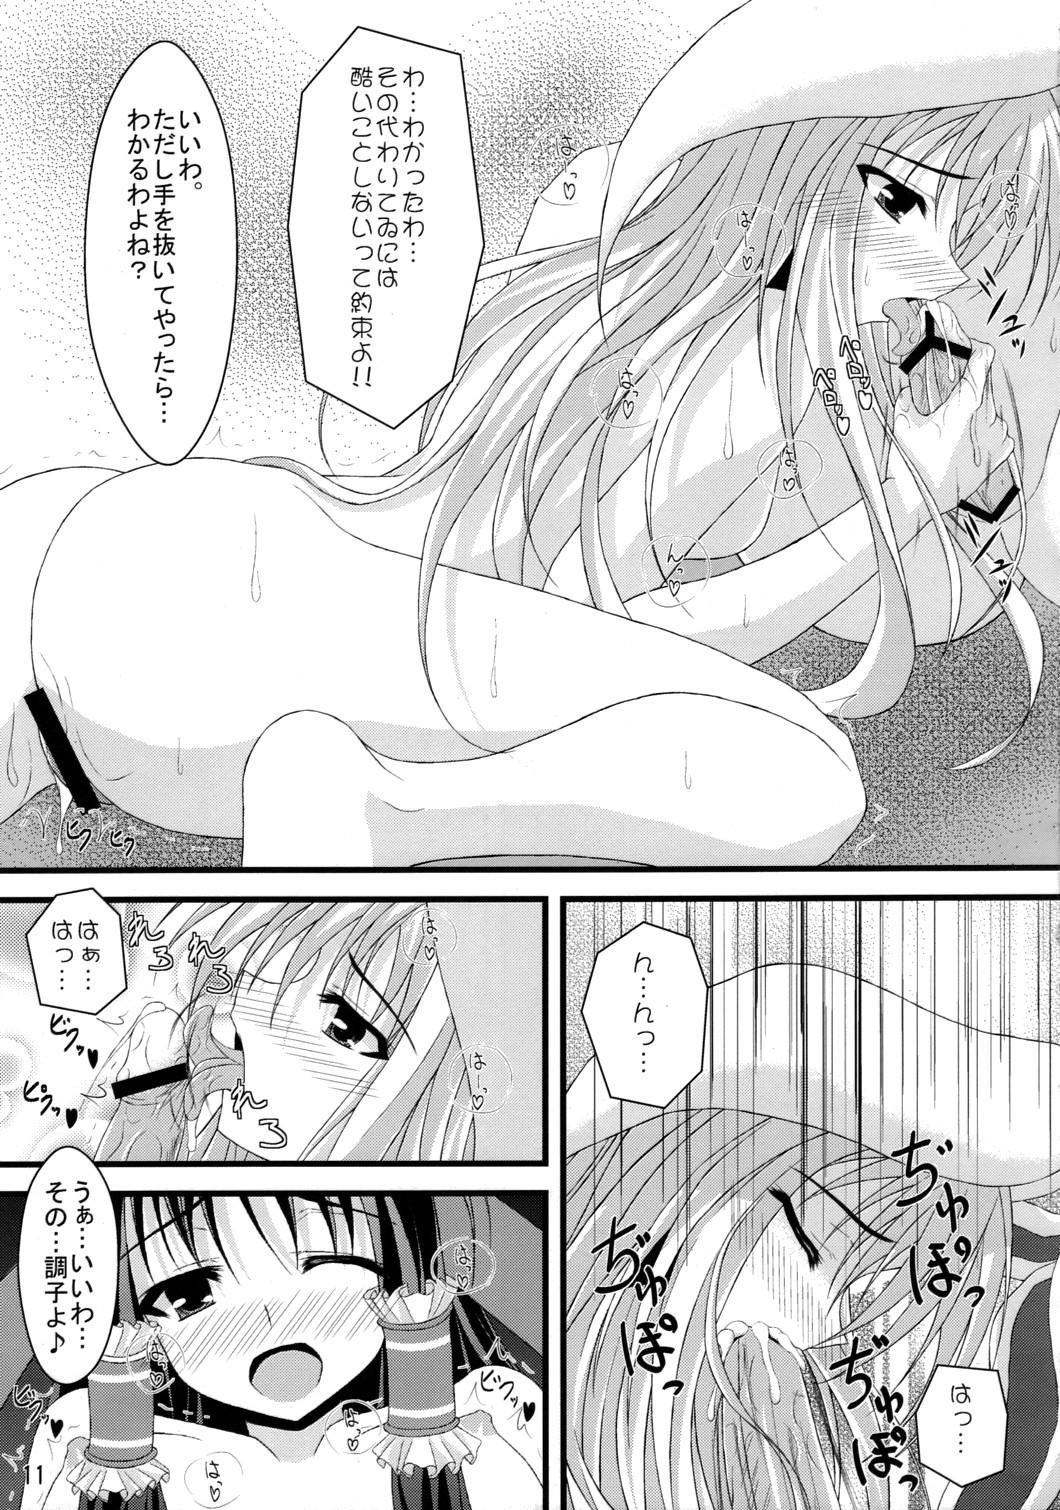 Kissing Tele-Mesmerism - Touhou project Transexual - Page 10